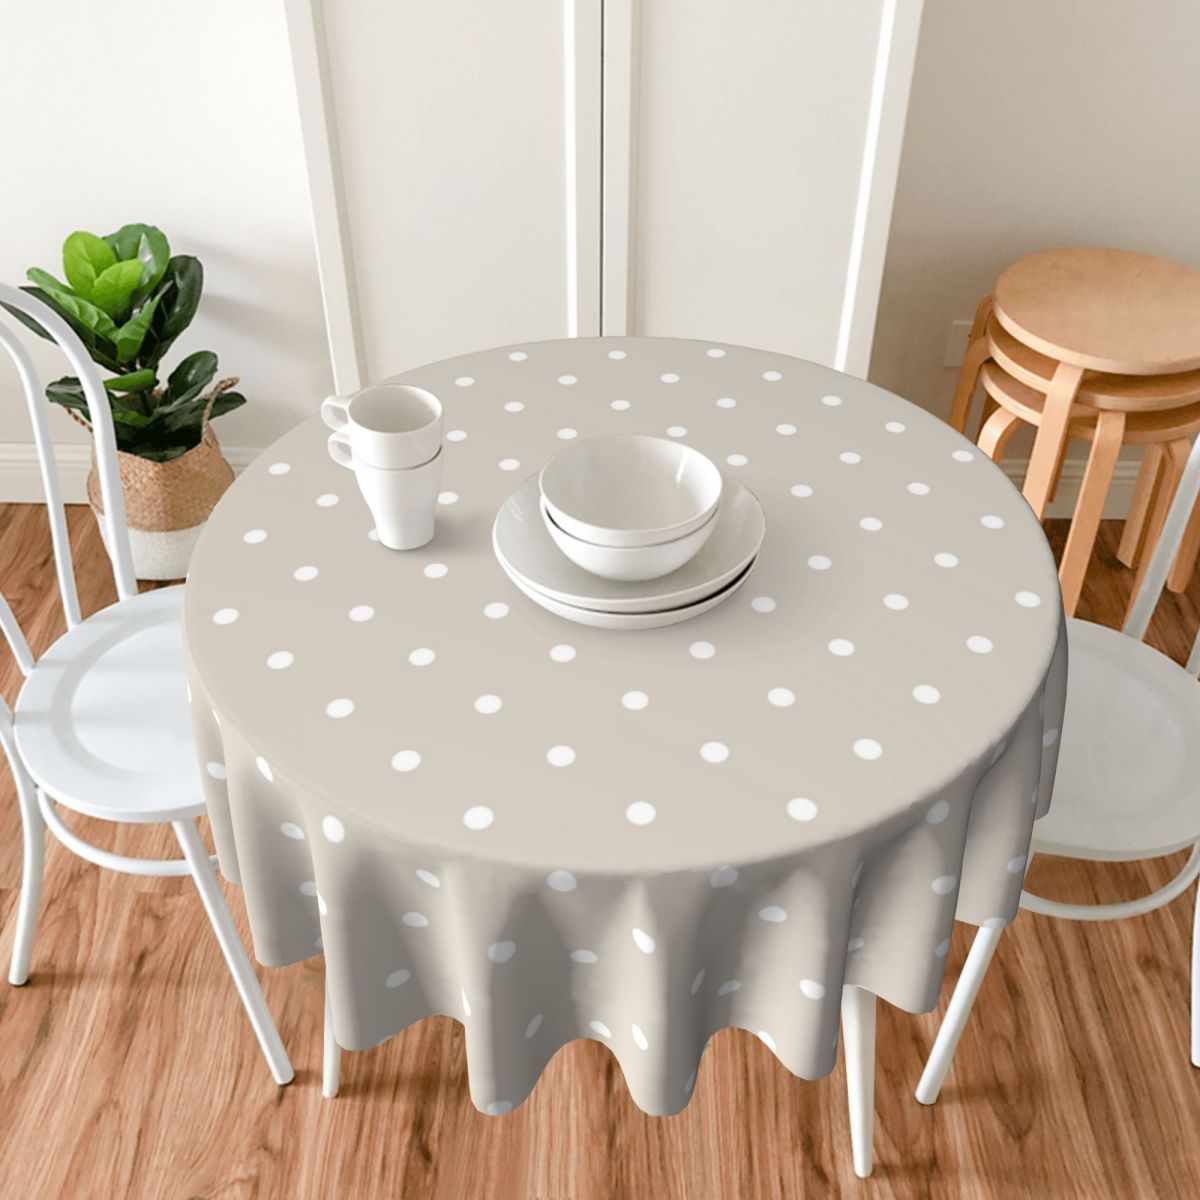 

Thanksgiving Harvest Season Polka Dot Print Round Tablecloth - 1pc 100% Polyester Woven Machine Made Stain-resistant Washable Fine Microfiber Table Cover For Dining Kitchen Party Decor